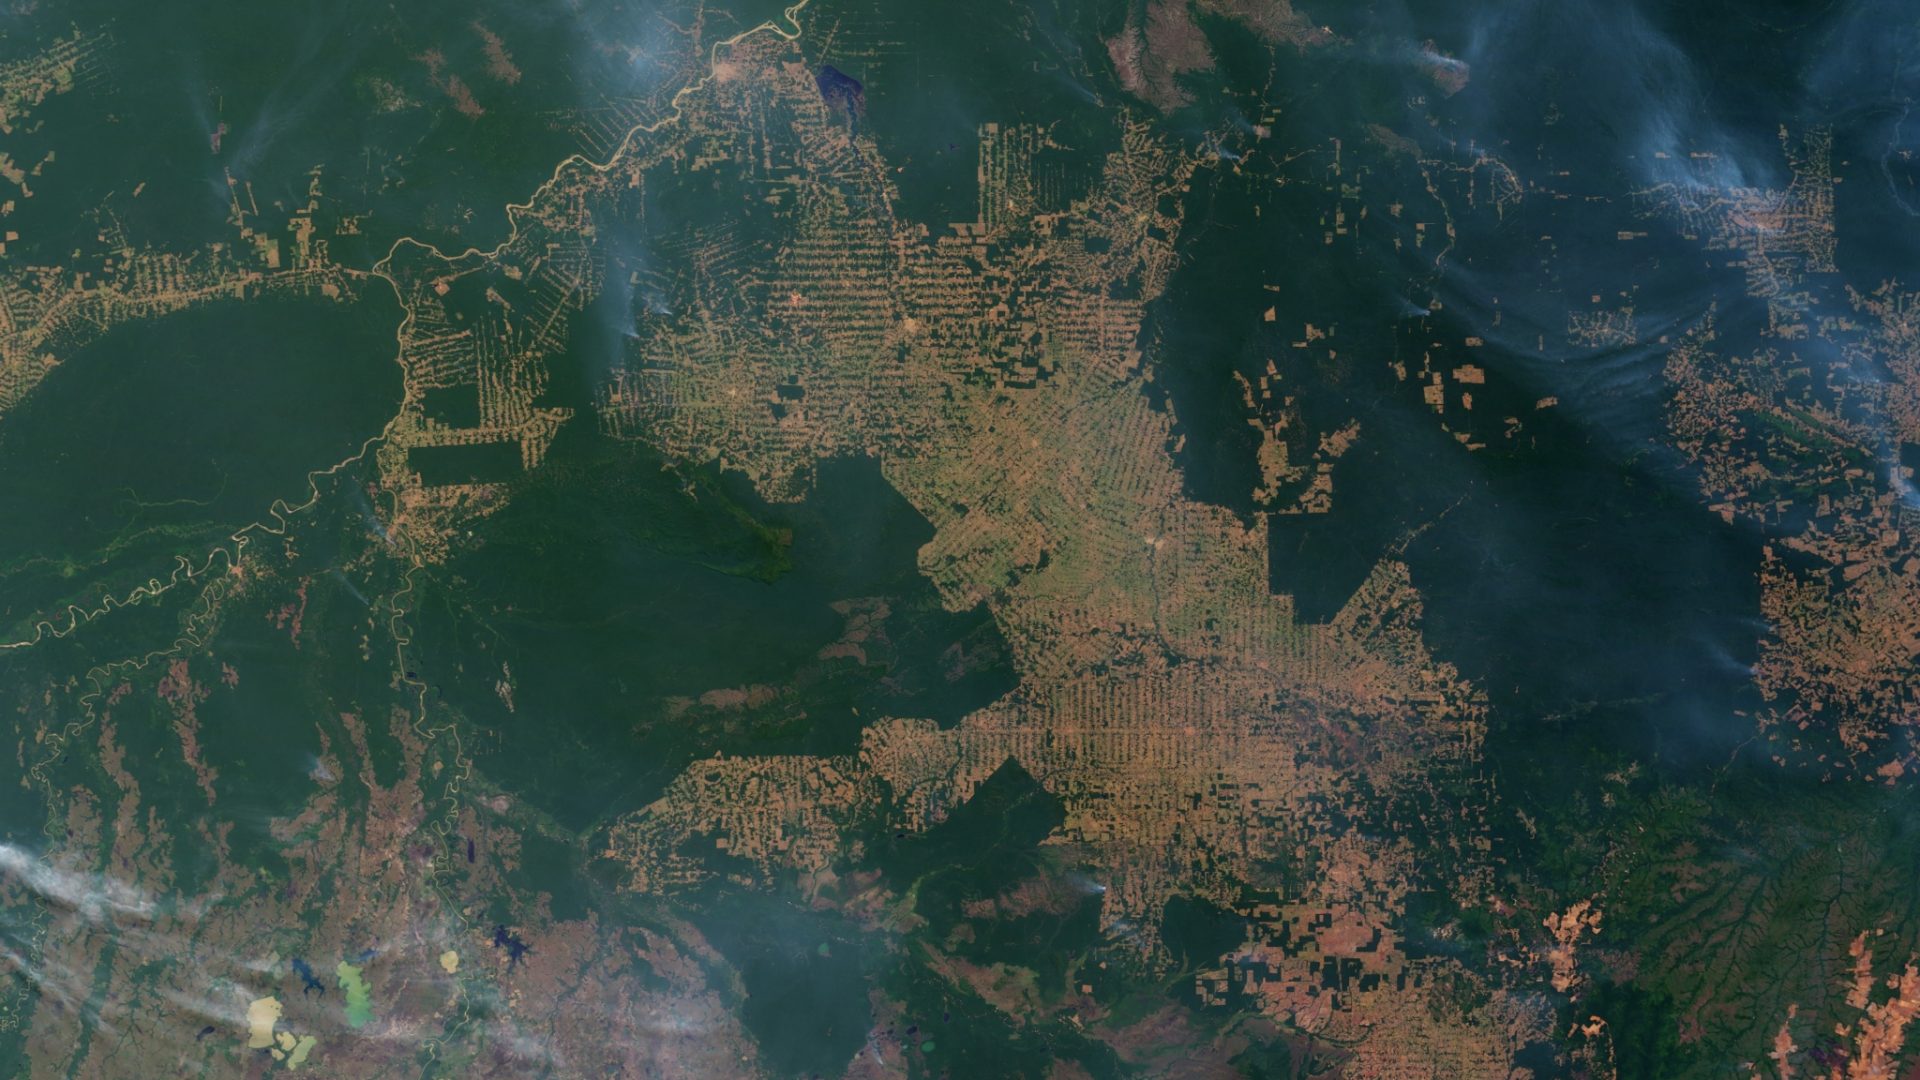 Aerial view of the Amazon, showing both pristine green rainforest and vast square patches of fire and deforestation